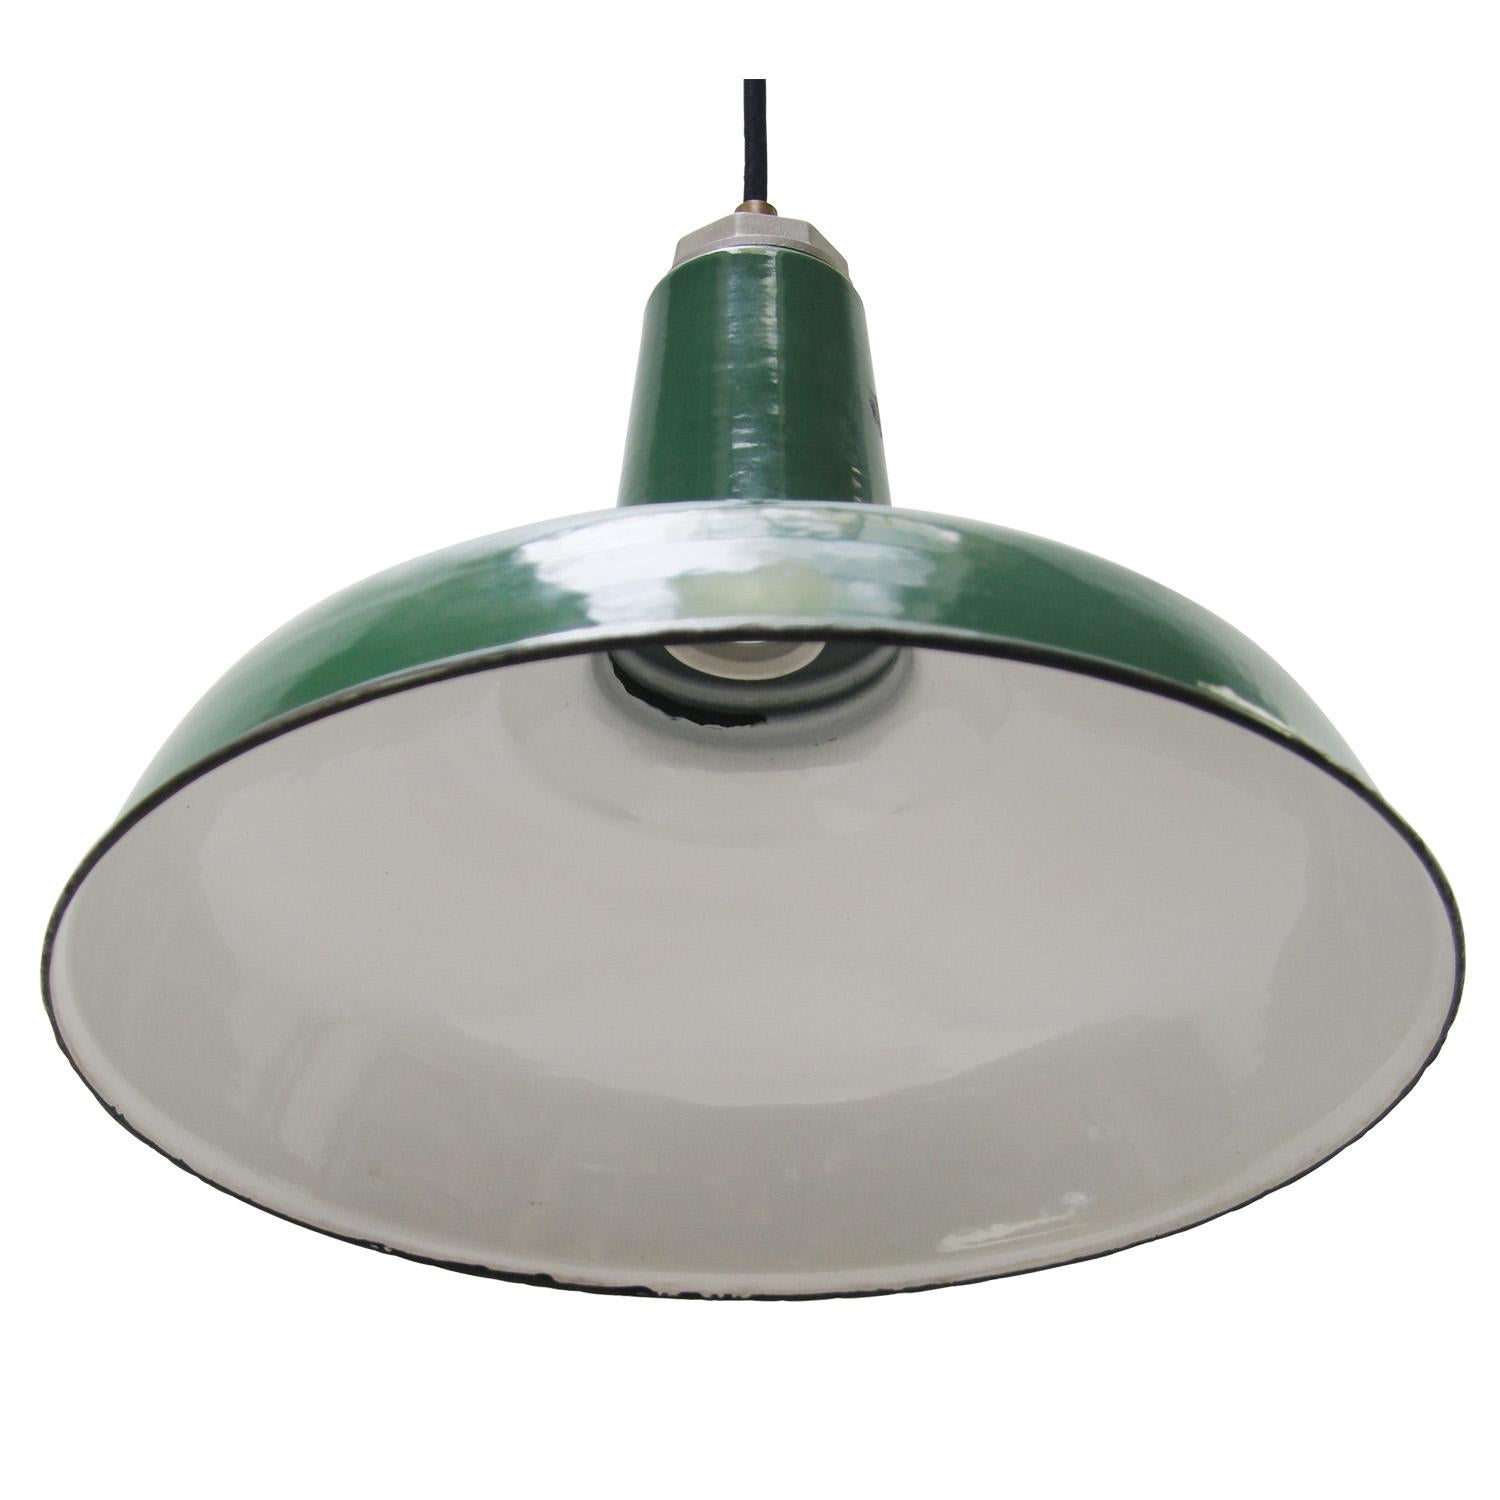 20th Century American Green Enamel Vintage Industrial Pendant Light by Silvaking, USA